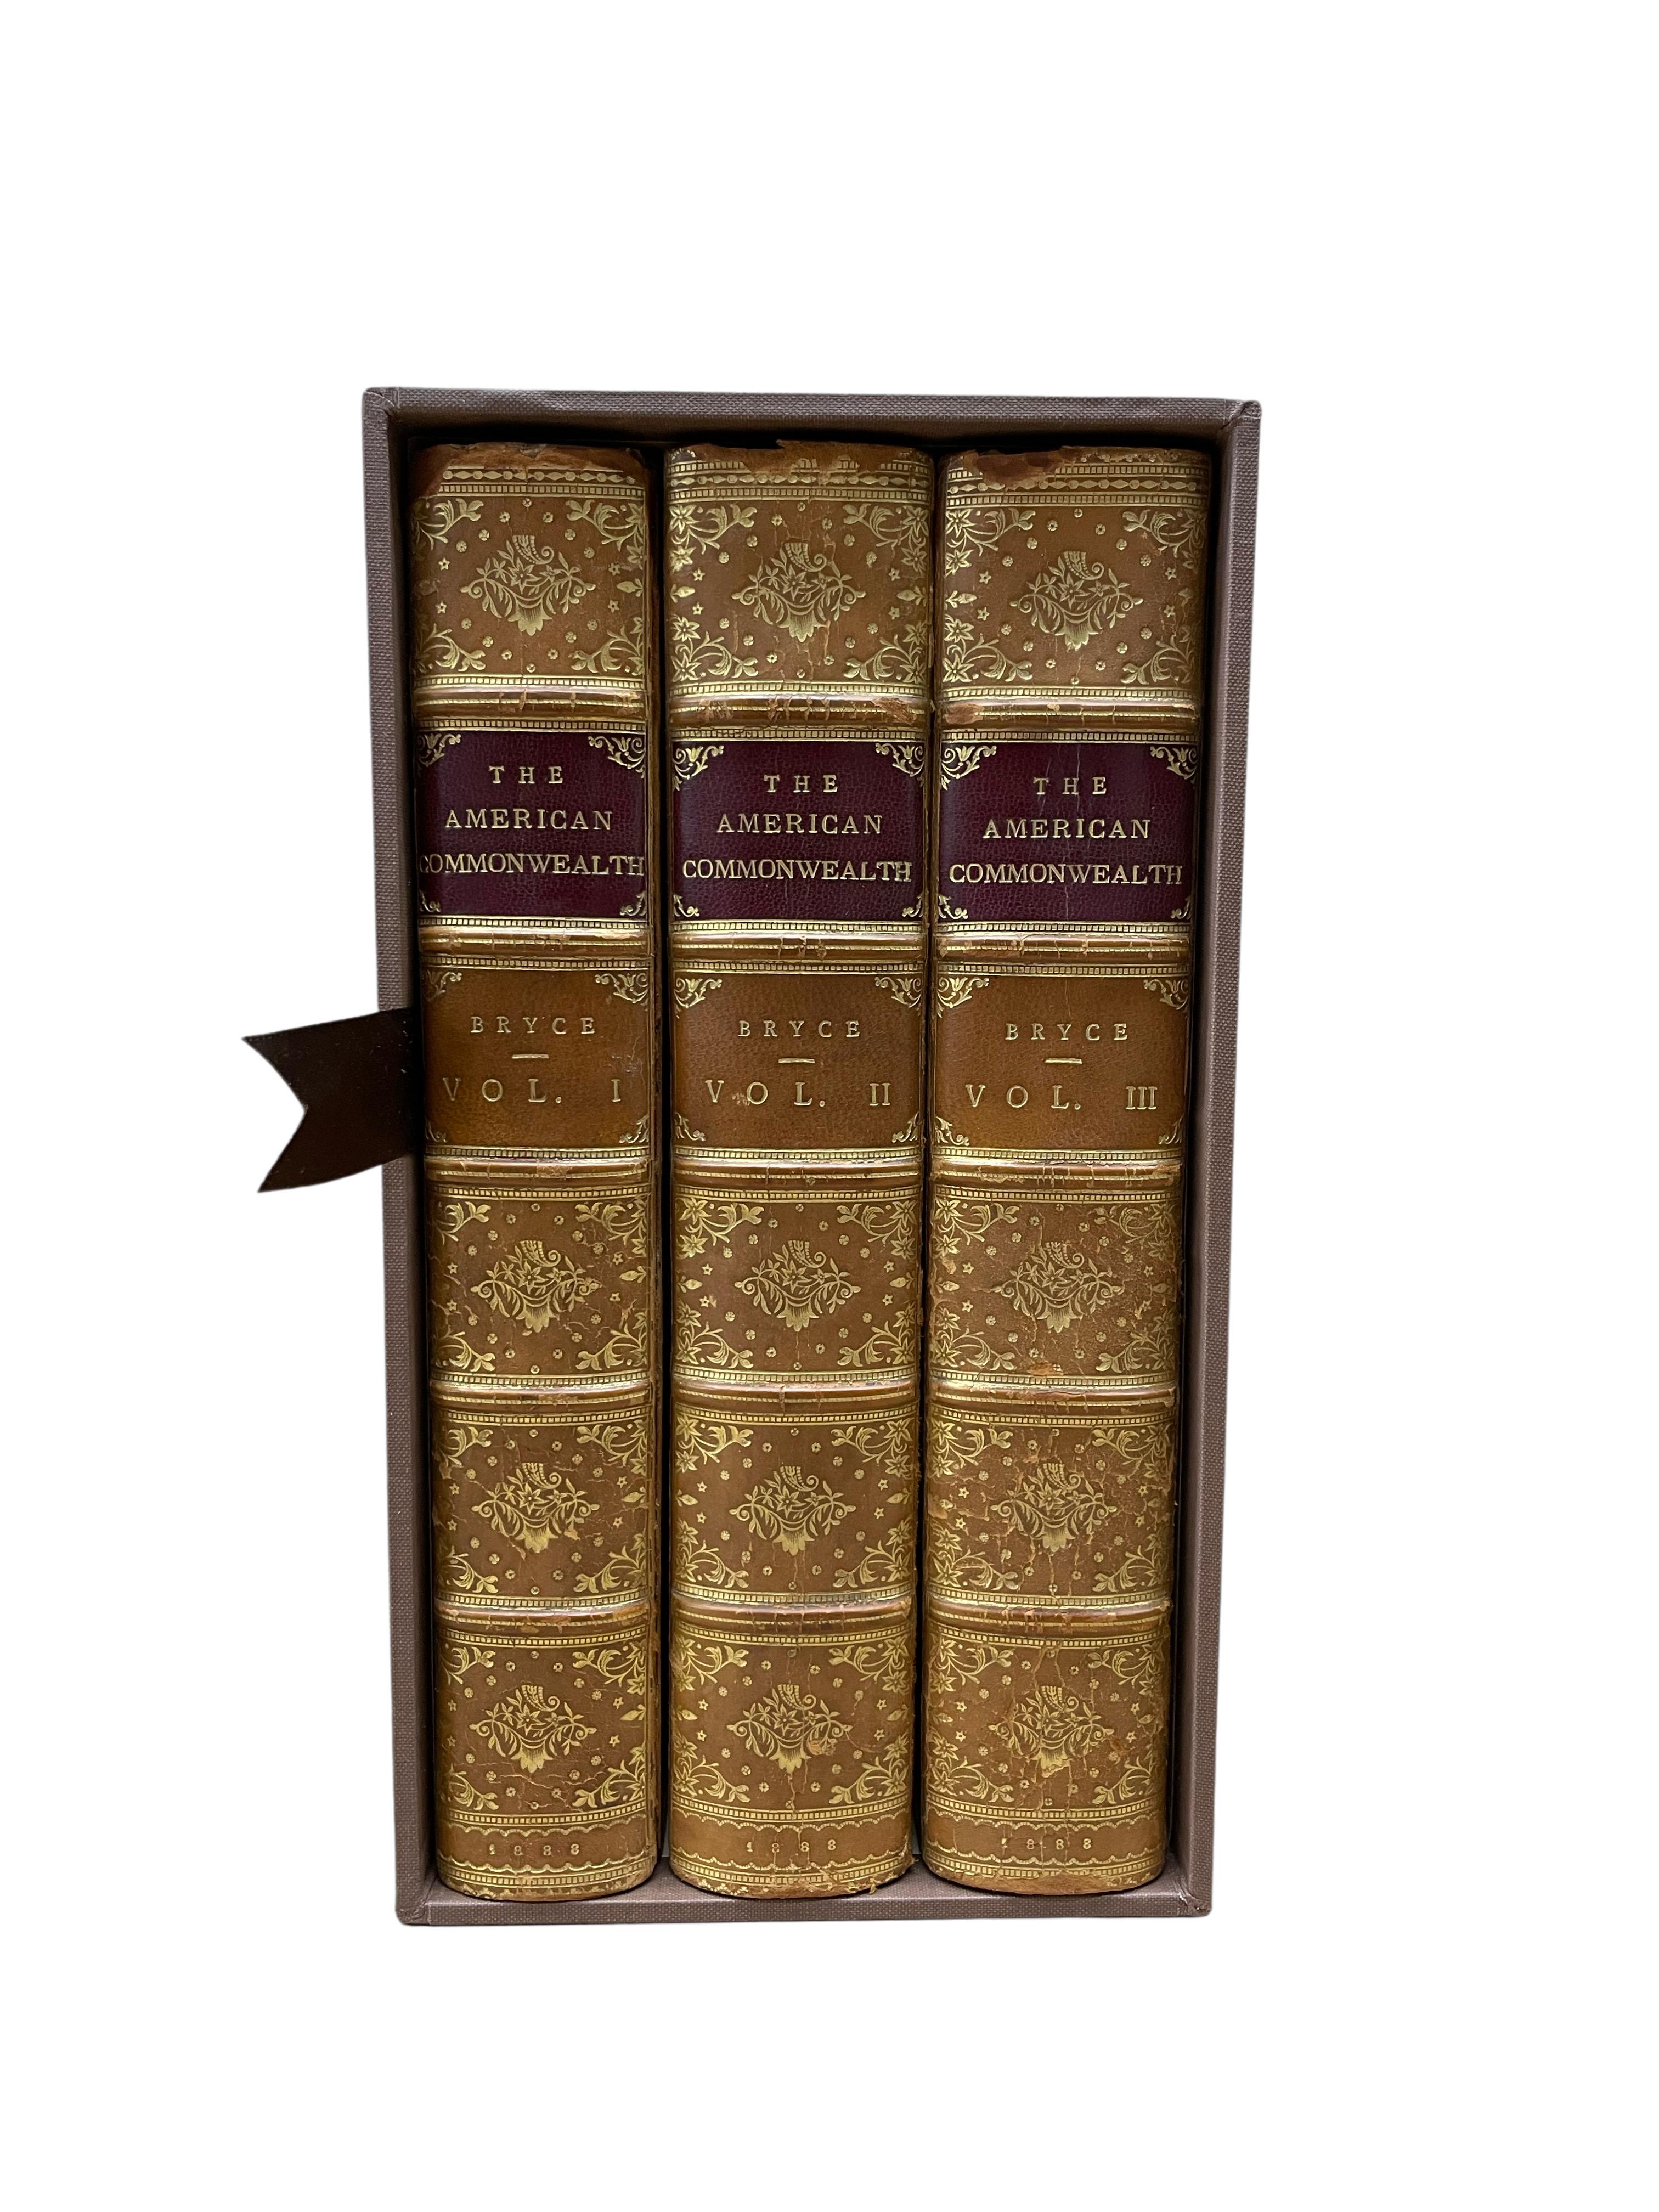 English The American Commonwealth by James Bryce, Three Volume Set, 1888